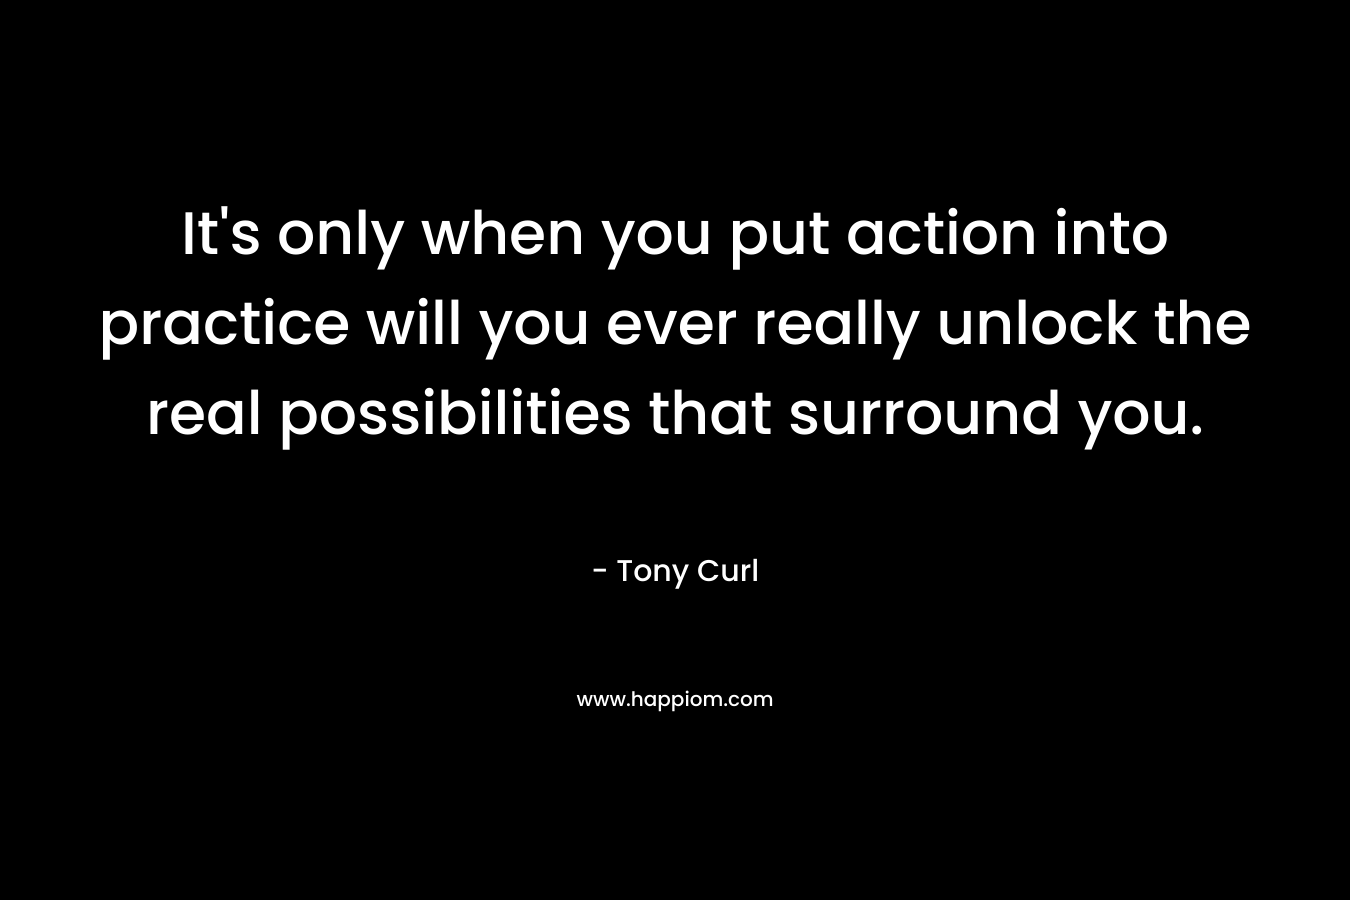 It's only when you put action into practice will you ever really unlock the real possibilities that surround you.